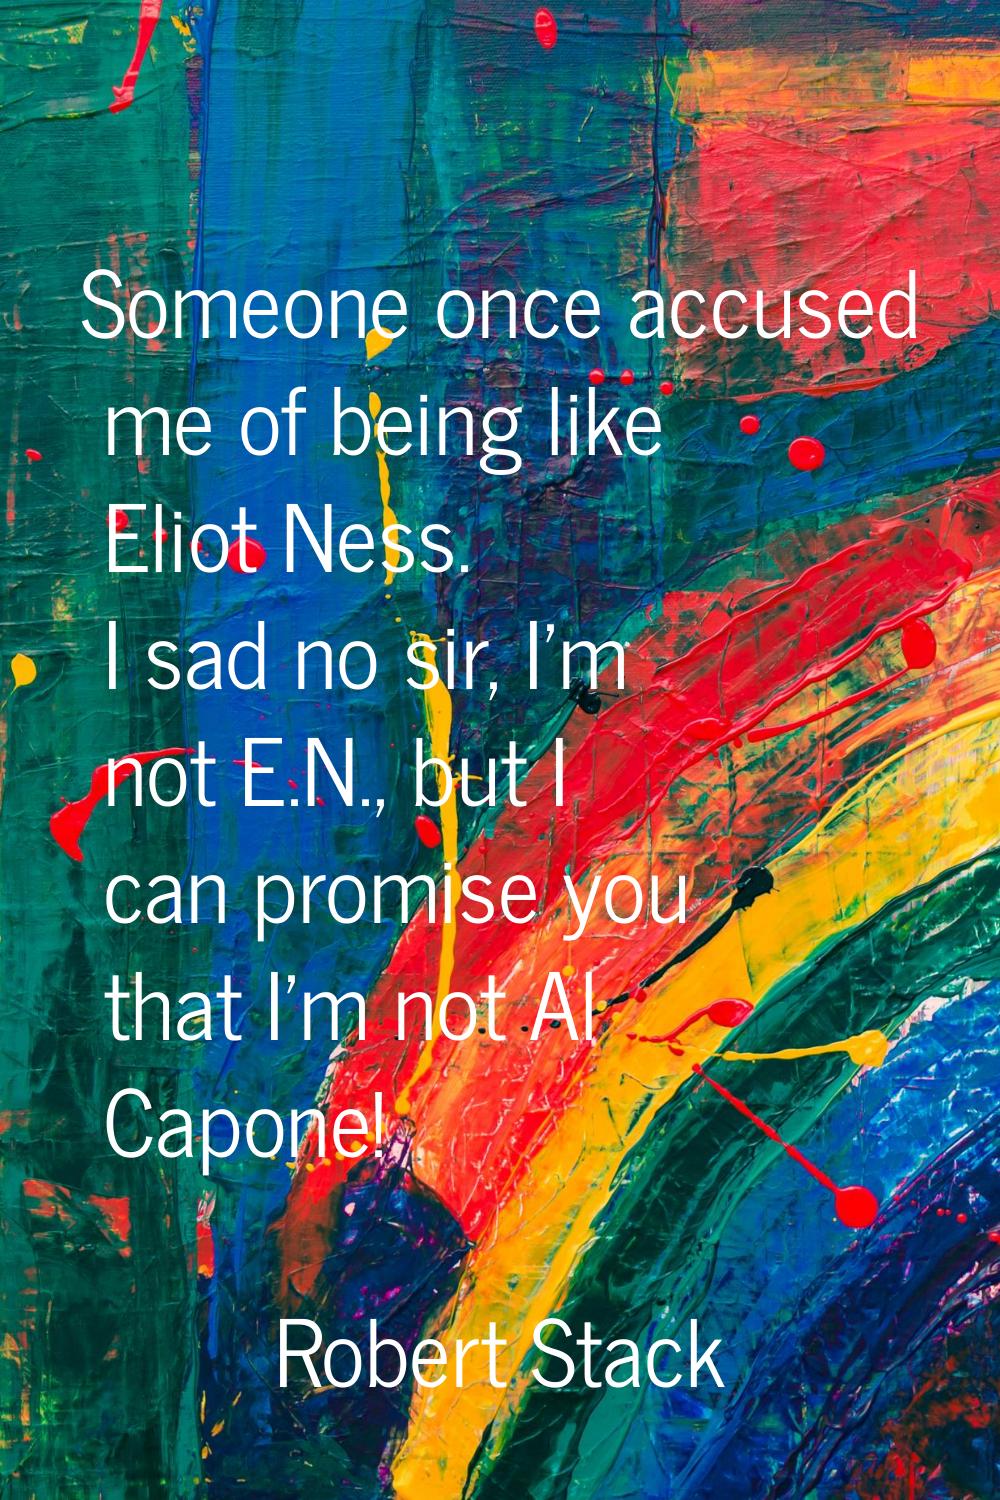 Someone once accused me of being like Eliot Ness. I sad no sir, I'm not E.N., but I can promise you